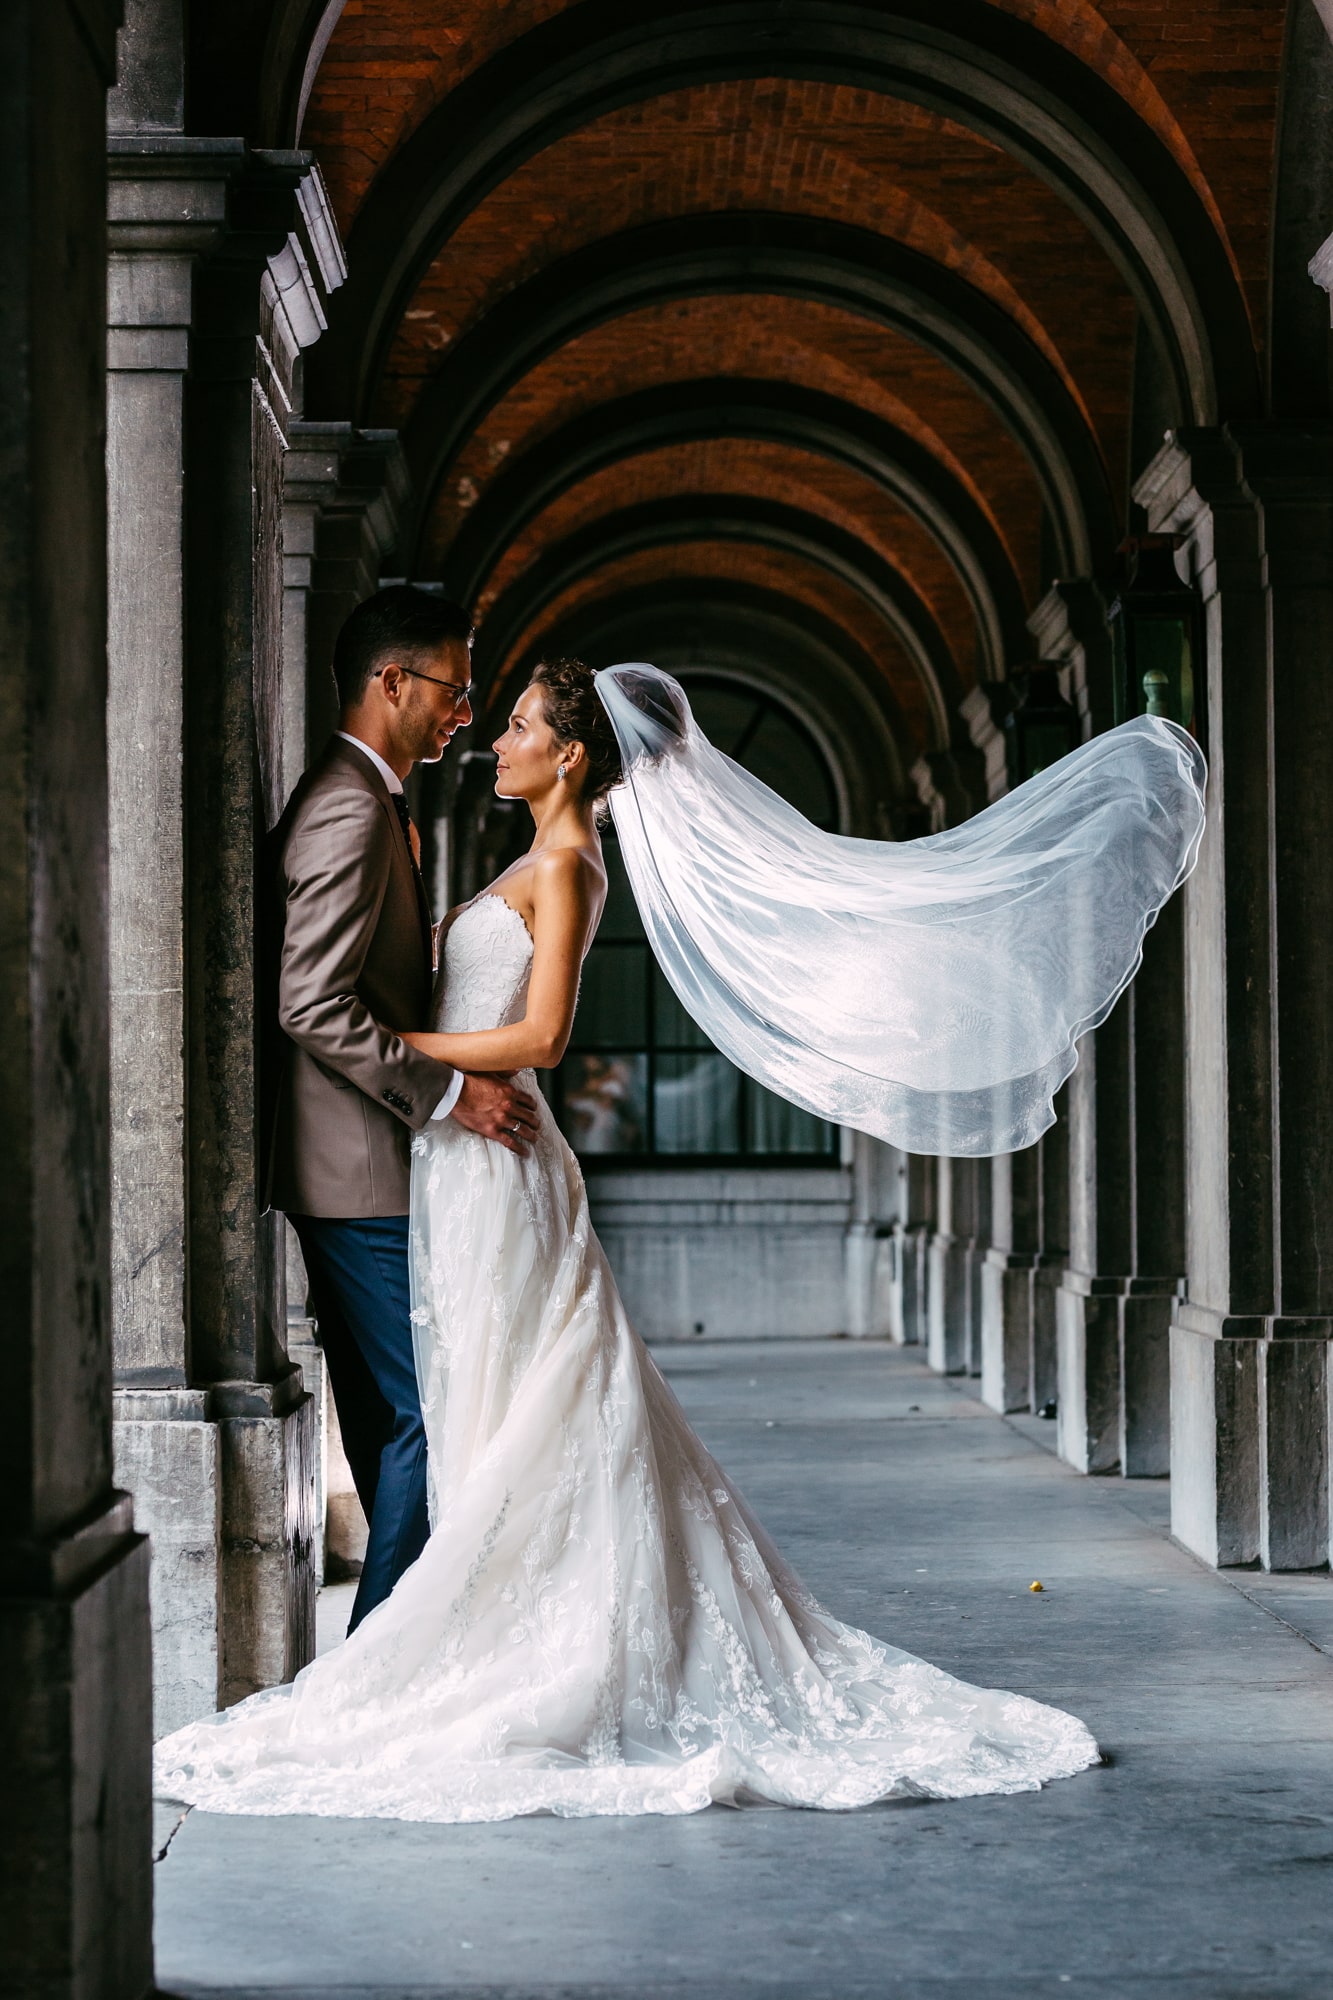 Wedding photography in The Hague courtyard